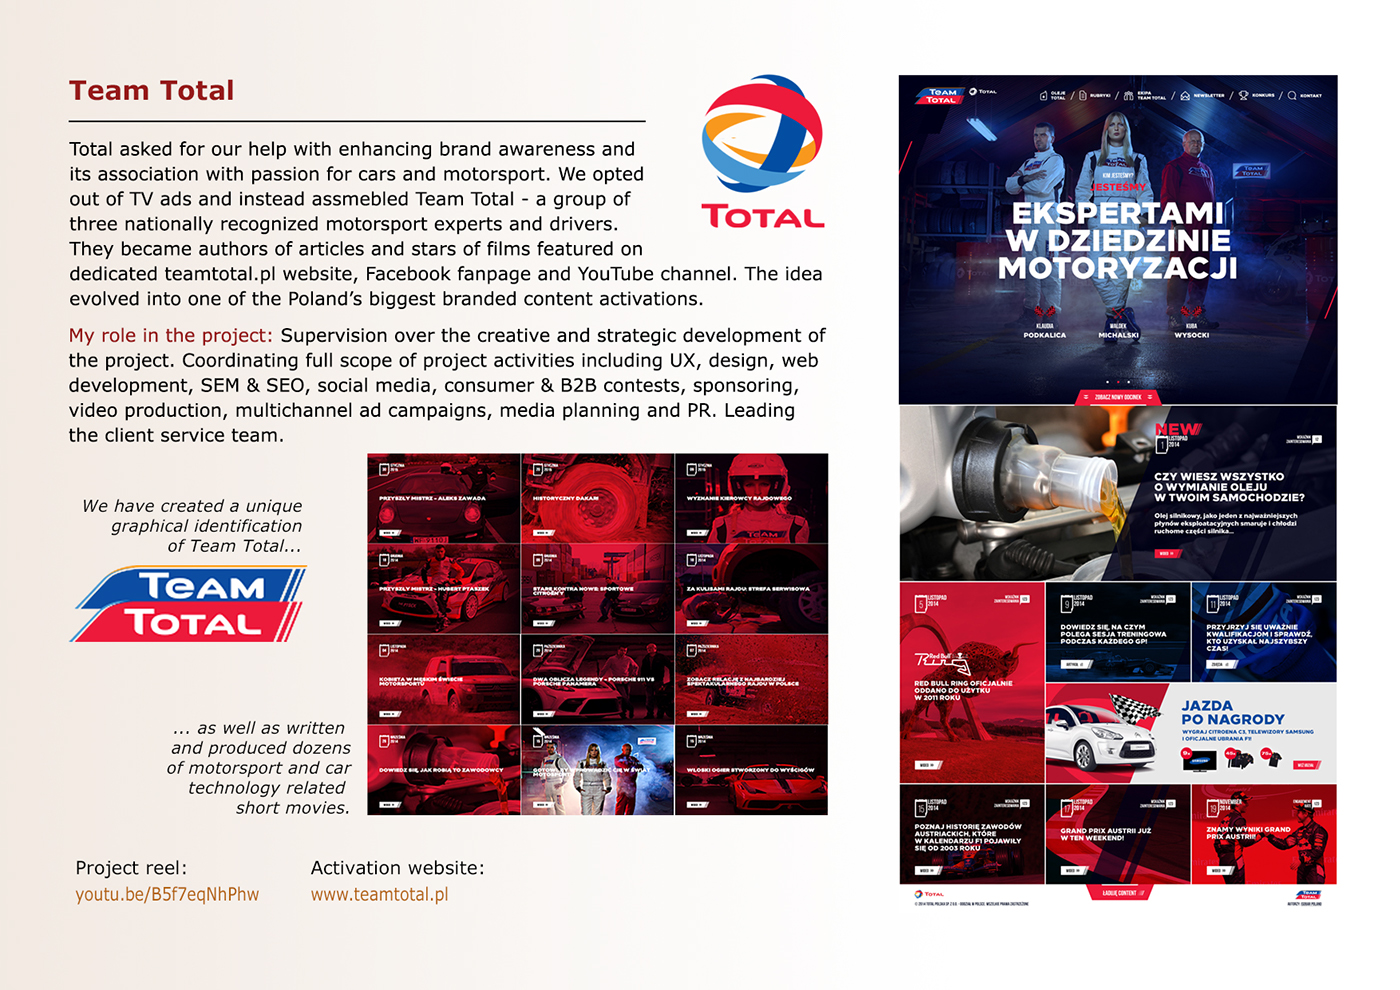 team total total branded content strategy video Motorsport Cars